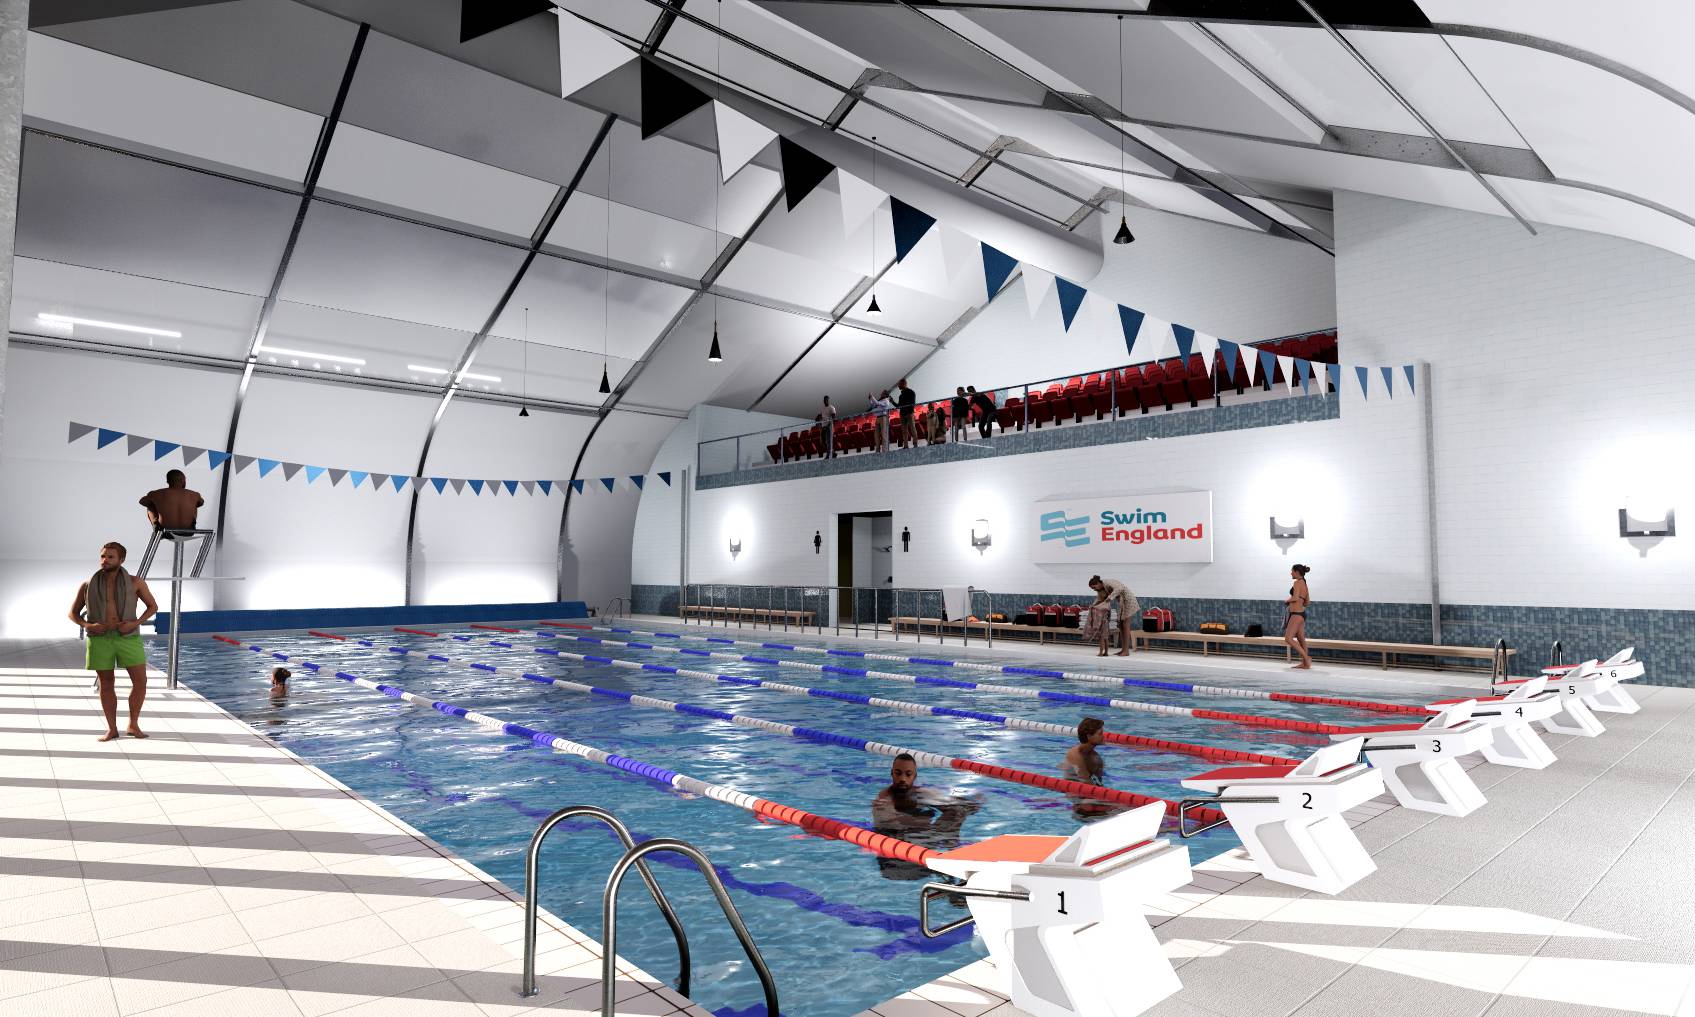 Swimmers left high & dry can get poolside again with a cutting edge solution